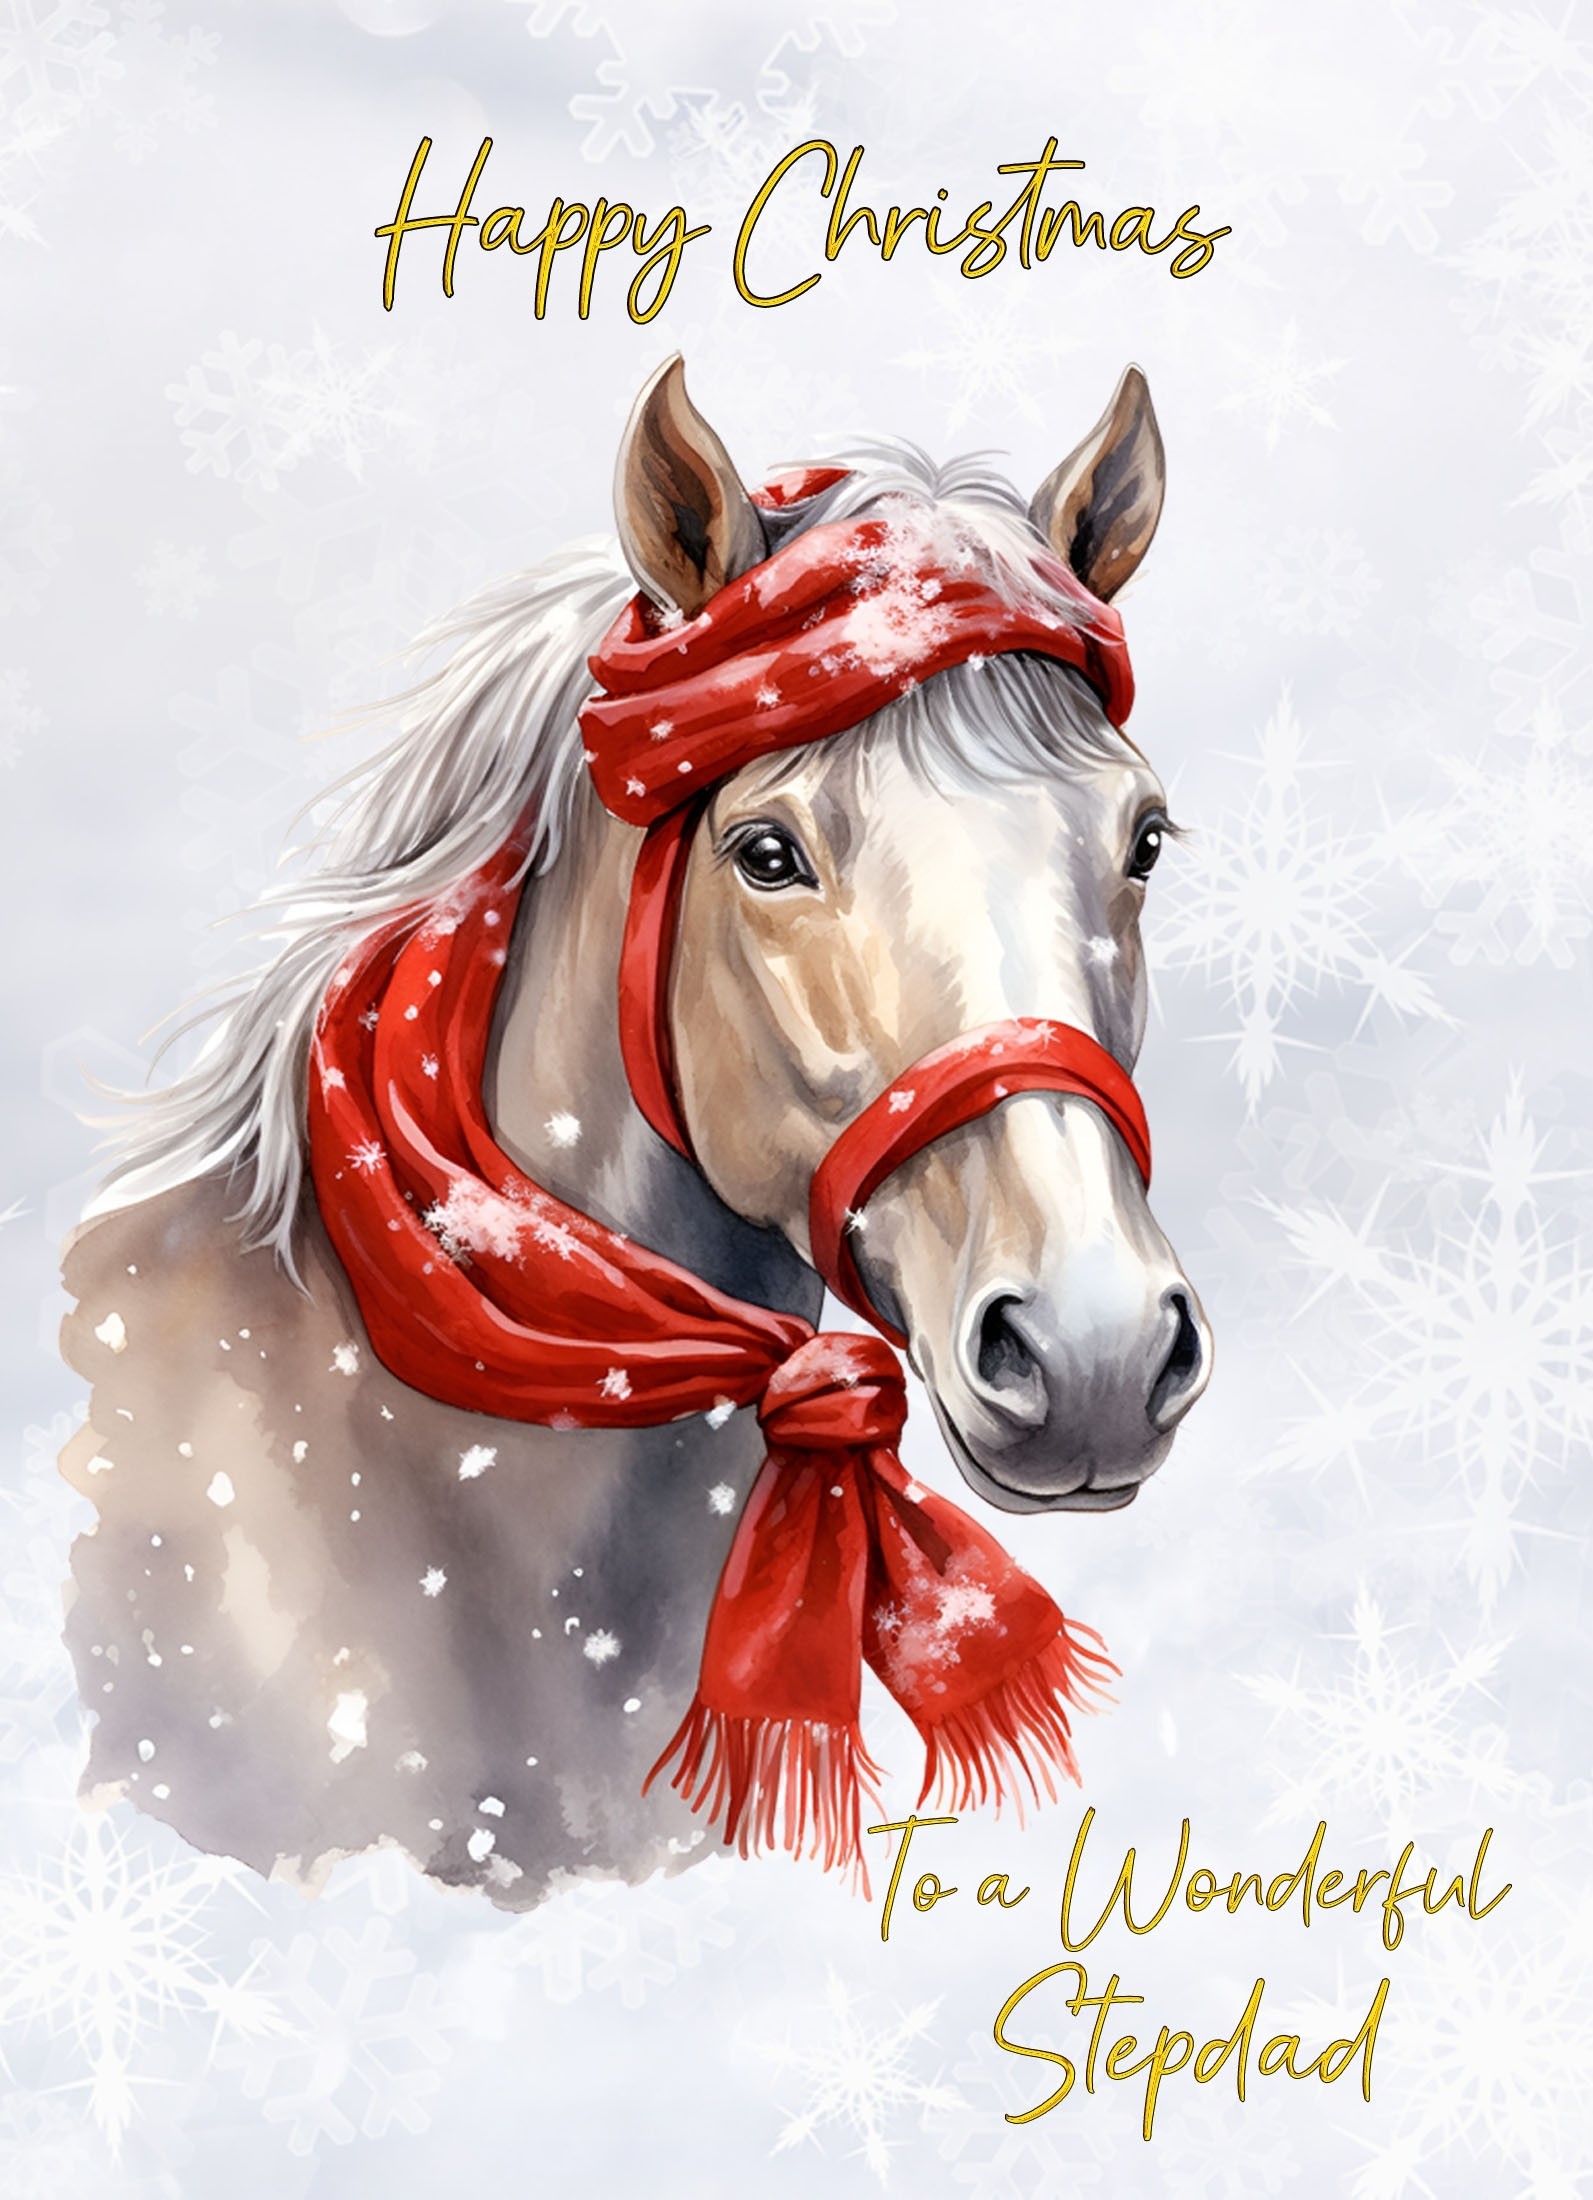 Christmas Card For Stepdad (Horse Art Red)